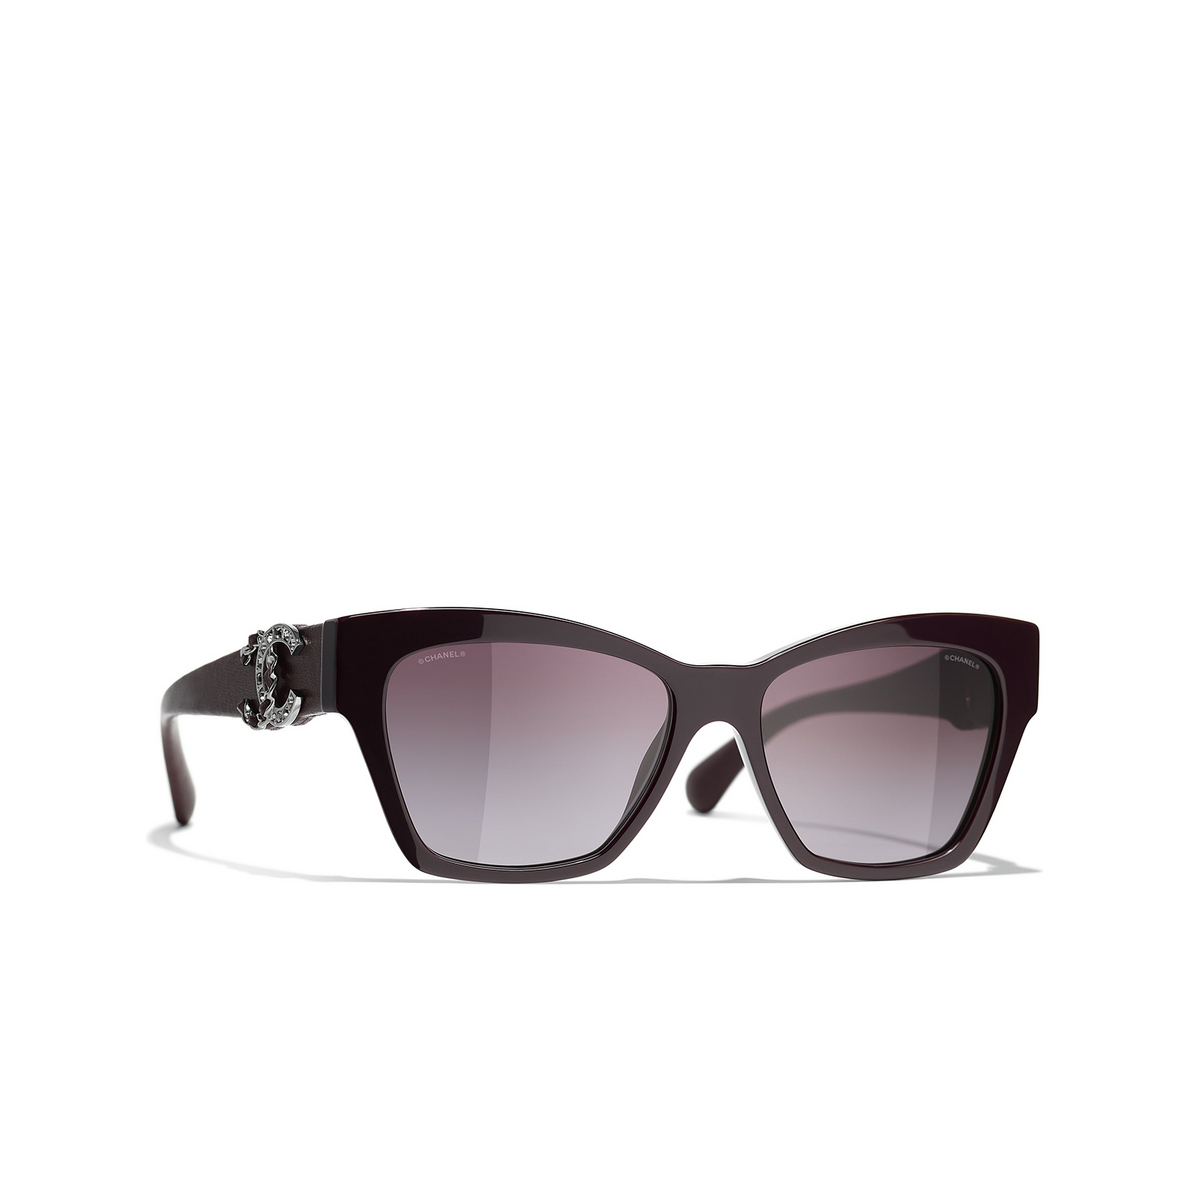 CHANEL butterfly Sunglasses 1461S1 Burgundy - three-quarters view